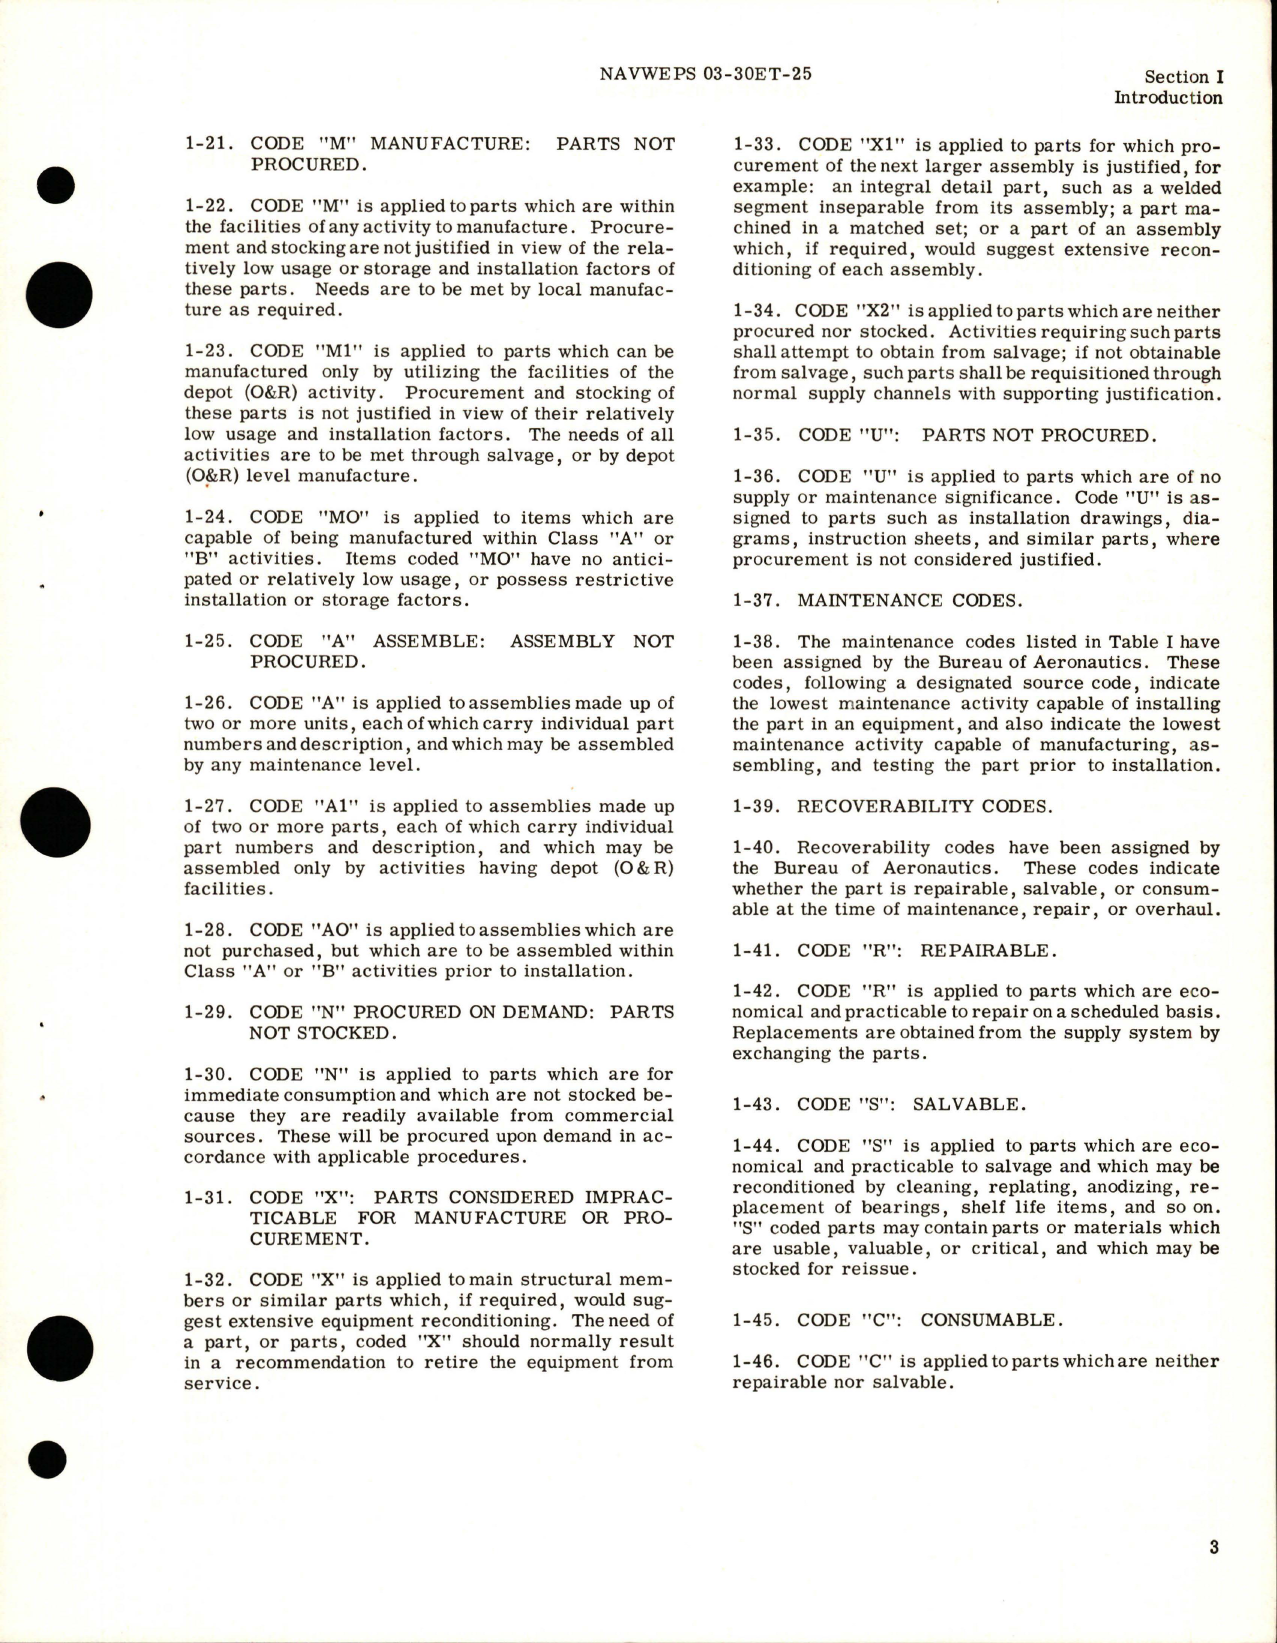 Sample page 5 from AirCorps Library document: Illustrated Parts for Electro-Mechanical Input Hydraulic Servo Control Valve Assembly - Part 100950-1 